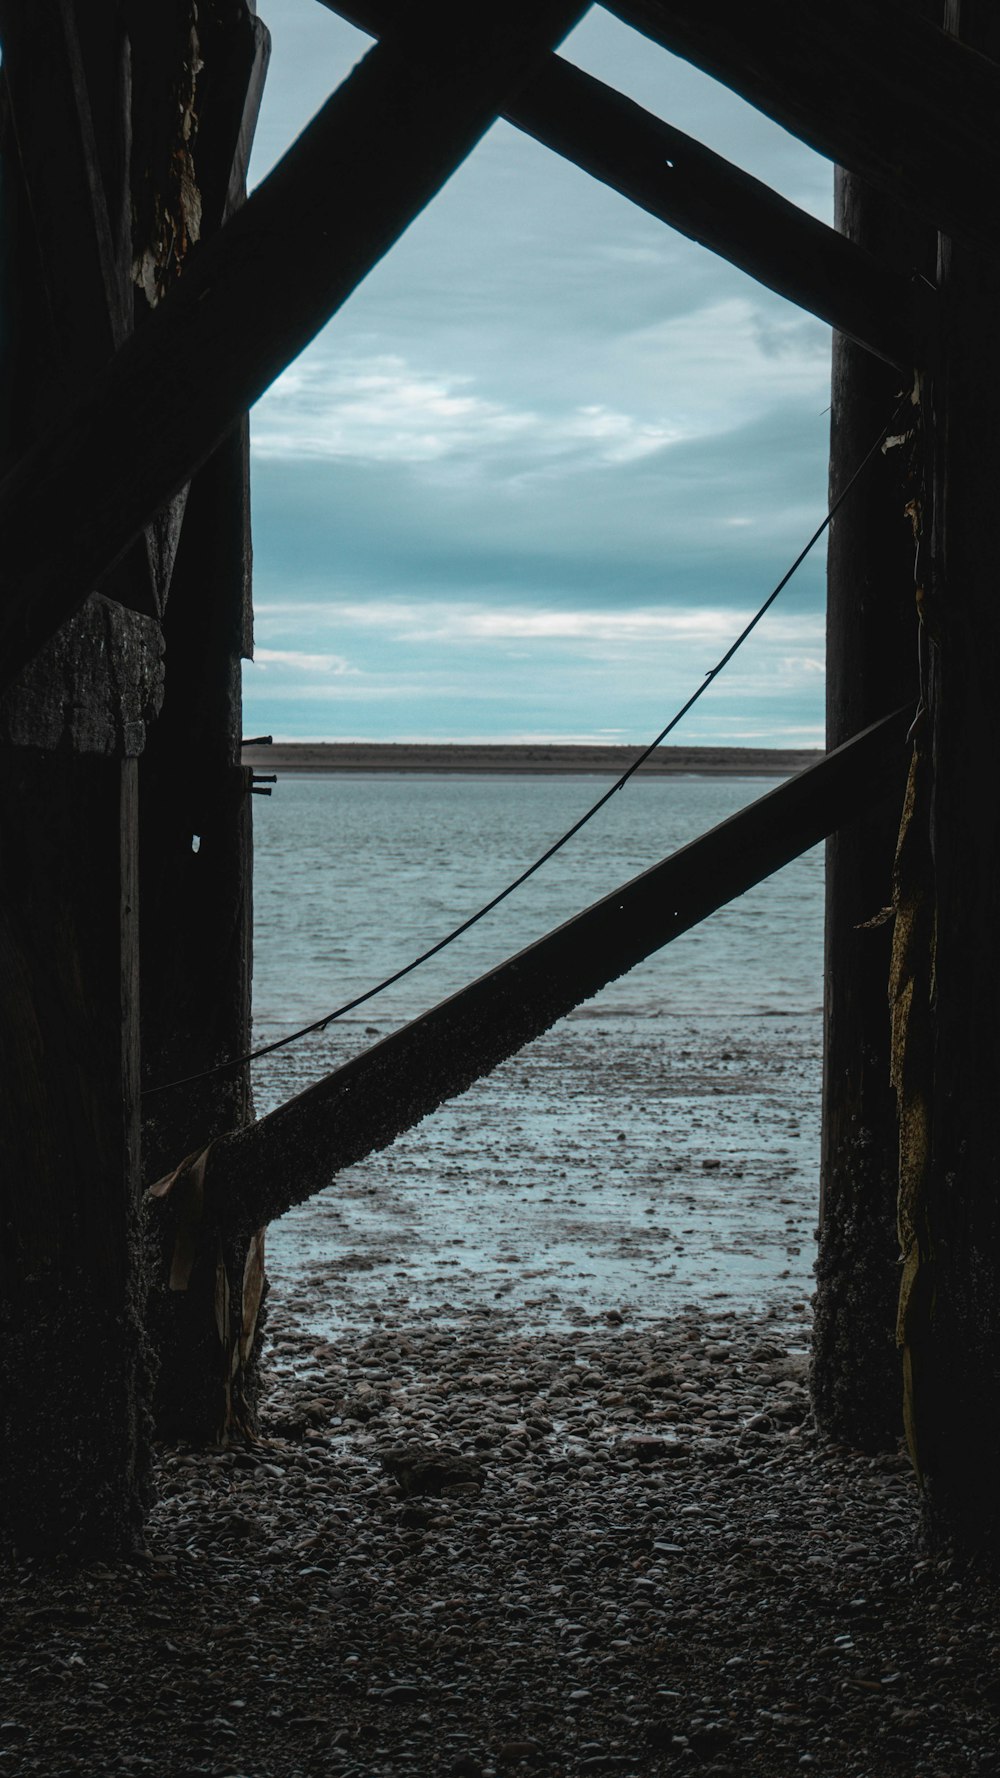 a view of a body of water through a wooden structure